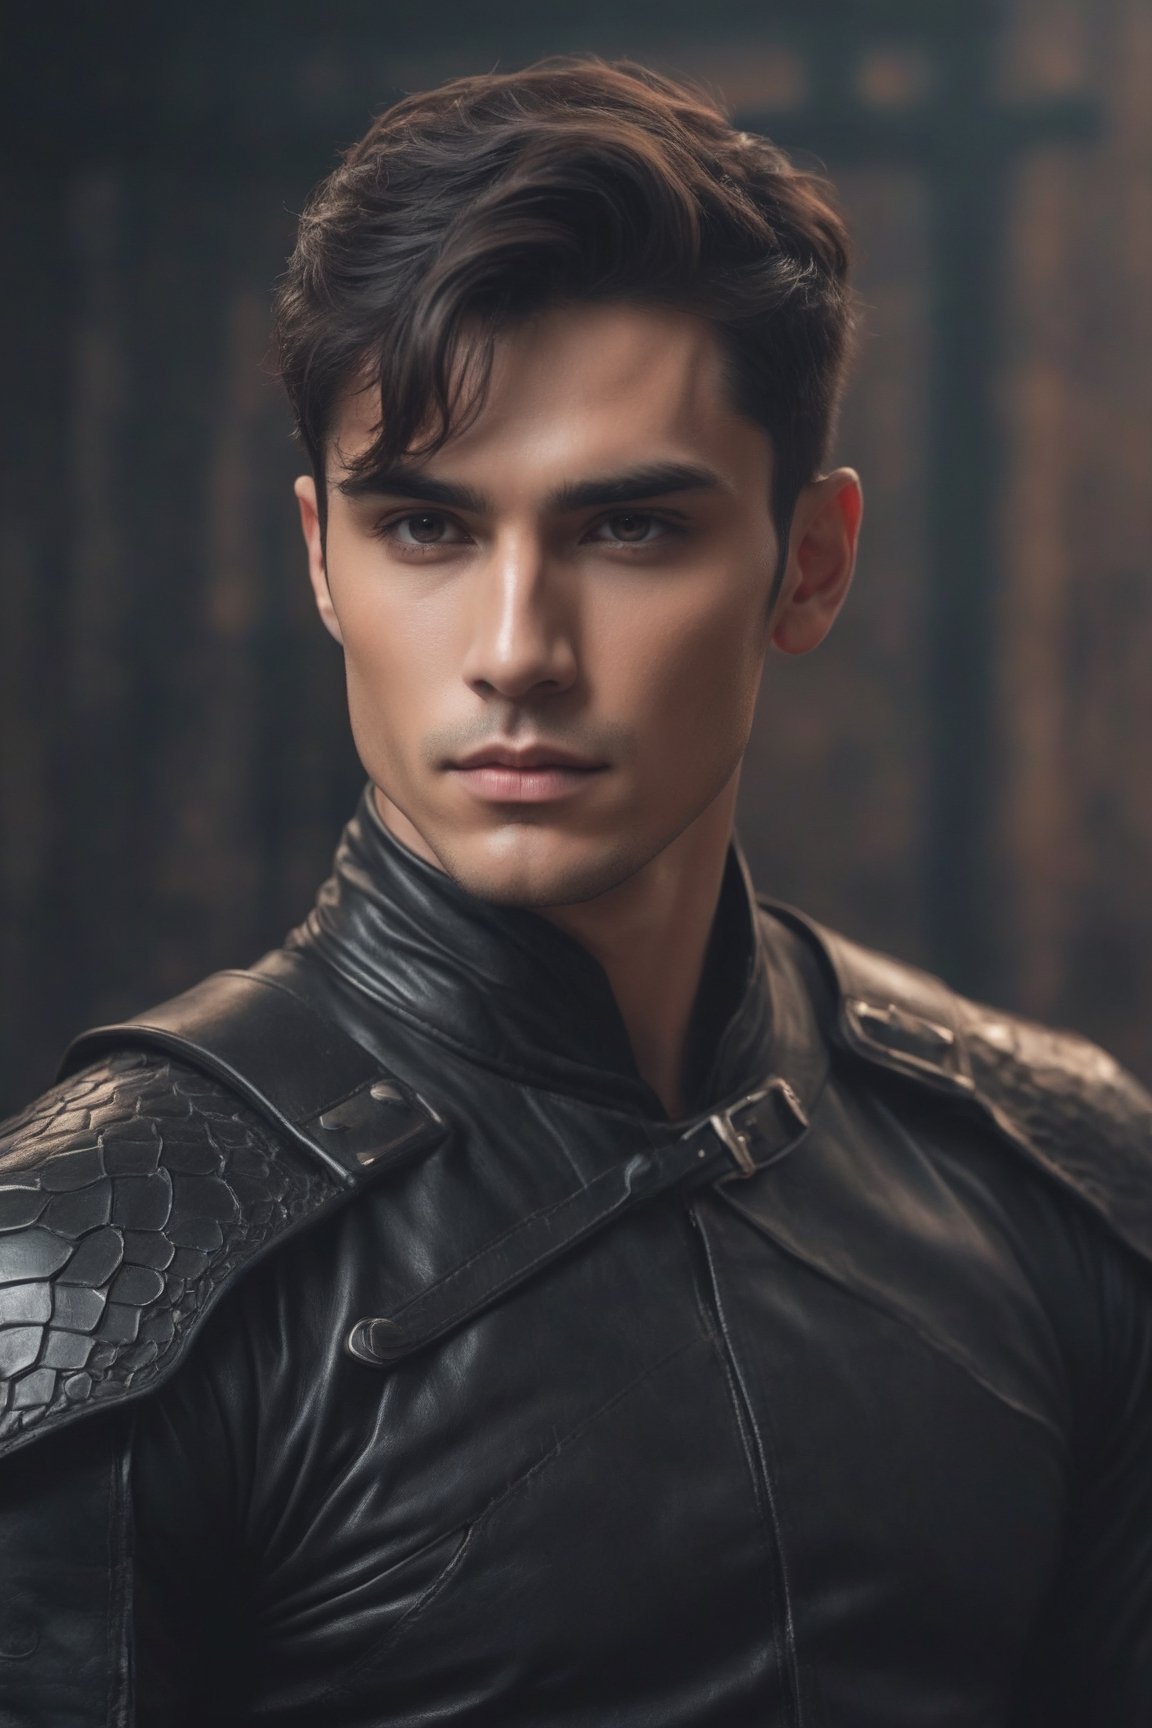 raw realistic  handsome  guy ,clen shaven,  dark brown hair,, brown eyes, muscular 
extremely handsome,in black dragon rider leather clothes, perfect square jaw, perfect face 
sculpted face, perfect features,black leather fitted clothes, dragon rider,muscular, square jaw,background grainy cinematic,  godlyphoto r3al,detailmaster2,aesthetic portrait, cinematic colors, earthy , moody,  look , grainy cinematic, fantasy vibes  godlyphoto r3al,detailmaster2,aesthetic portrait, cinematic colors, earthy , moody,  